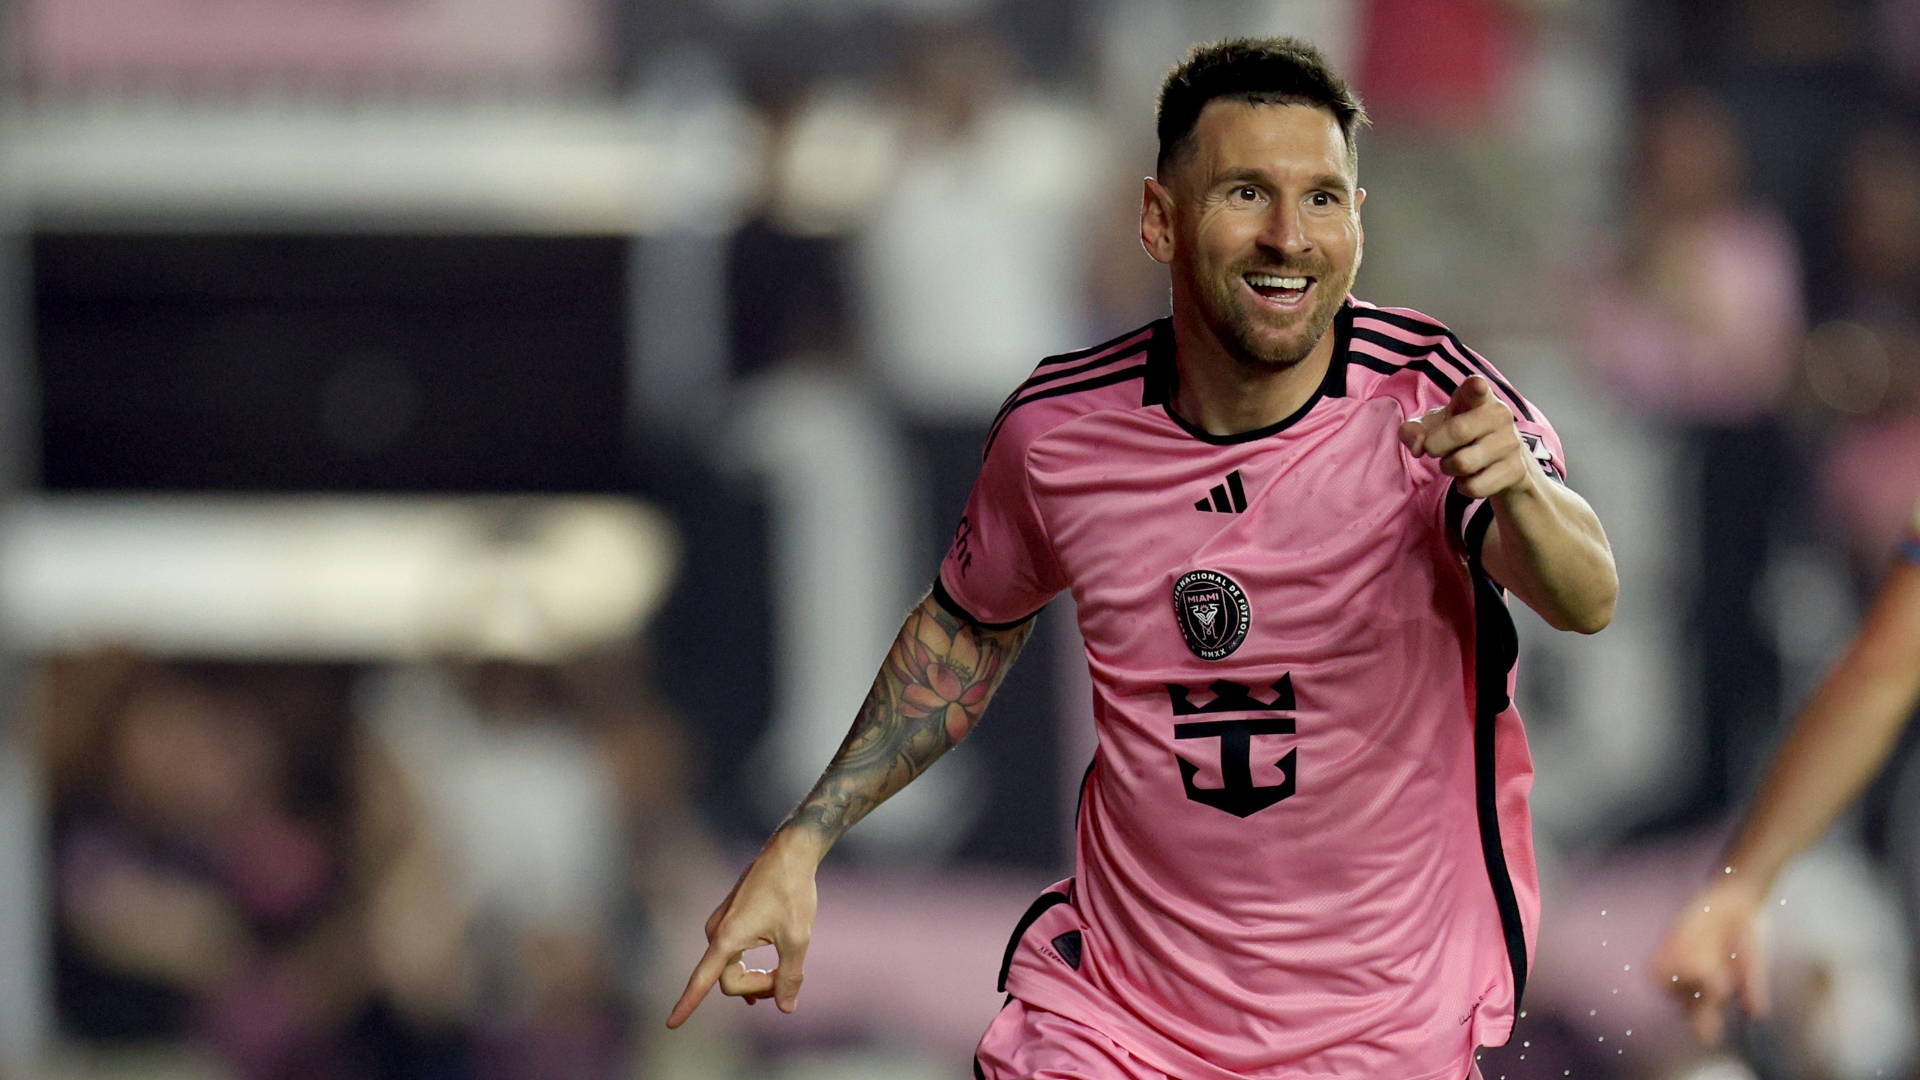 Messi finishes calmly to put Inter Miami ahead